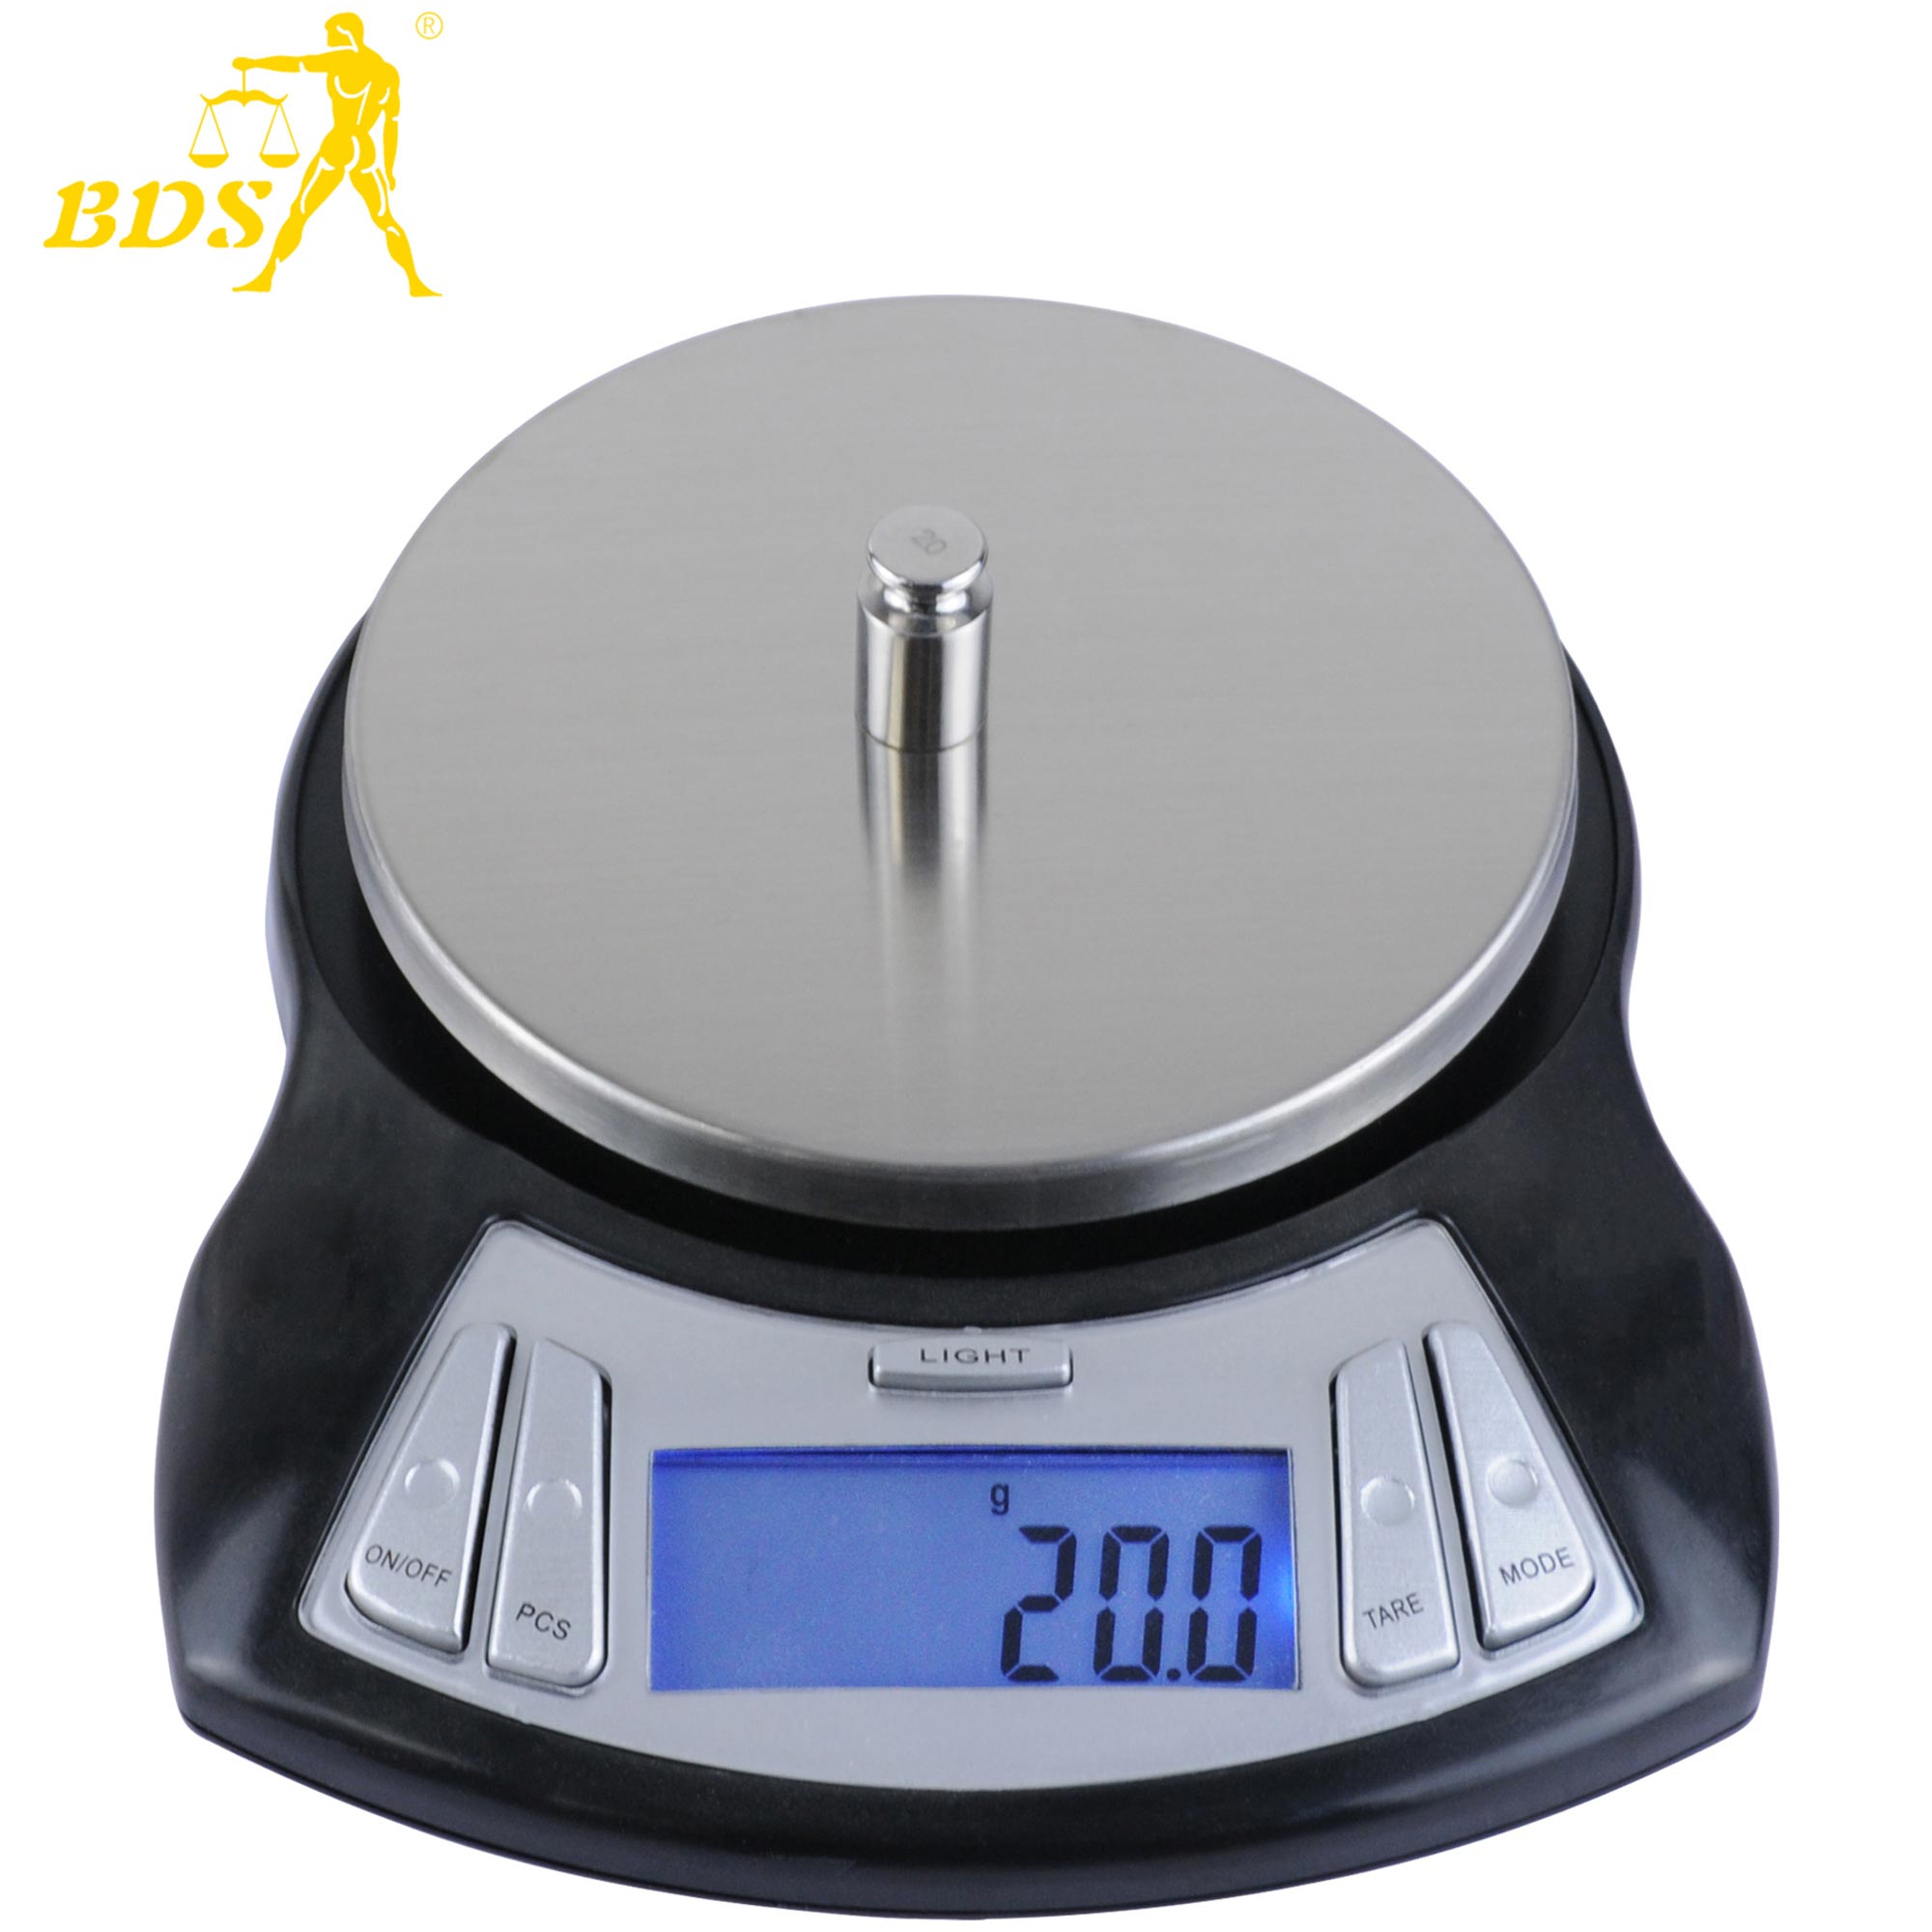 0.1g digital kitchen scale household scale tobacco electronic weighing scale